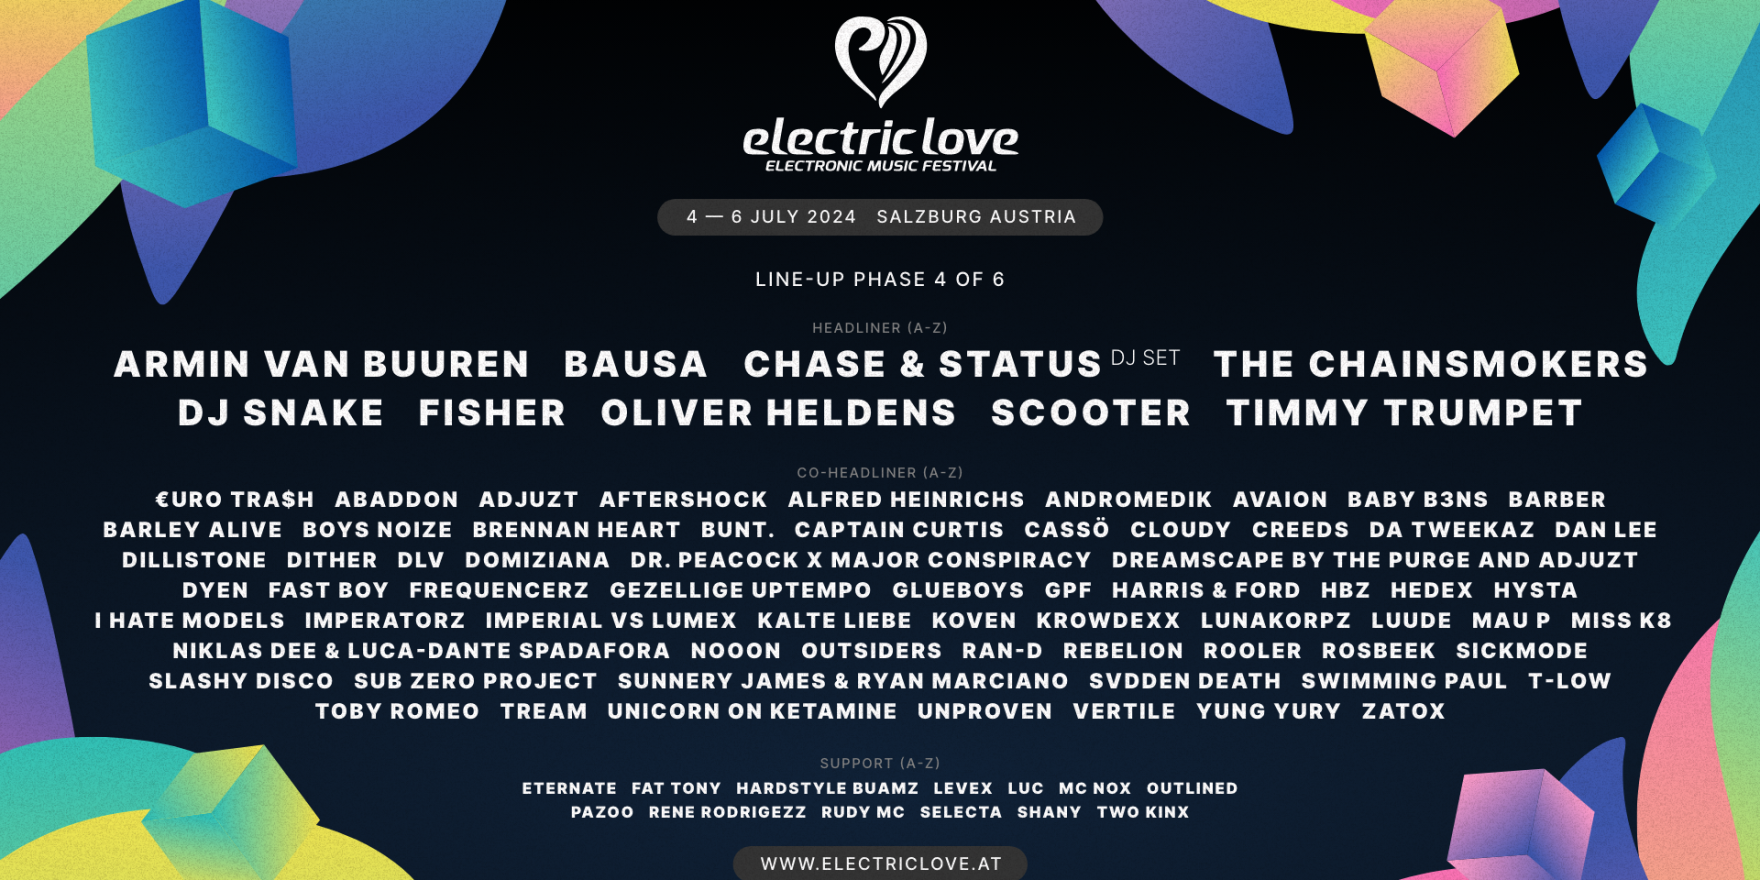 Electric Love - Line-Up Phase 4